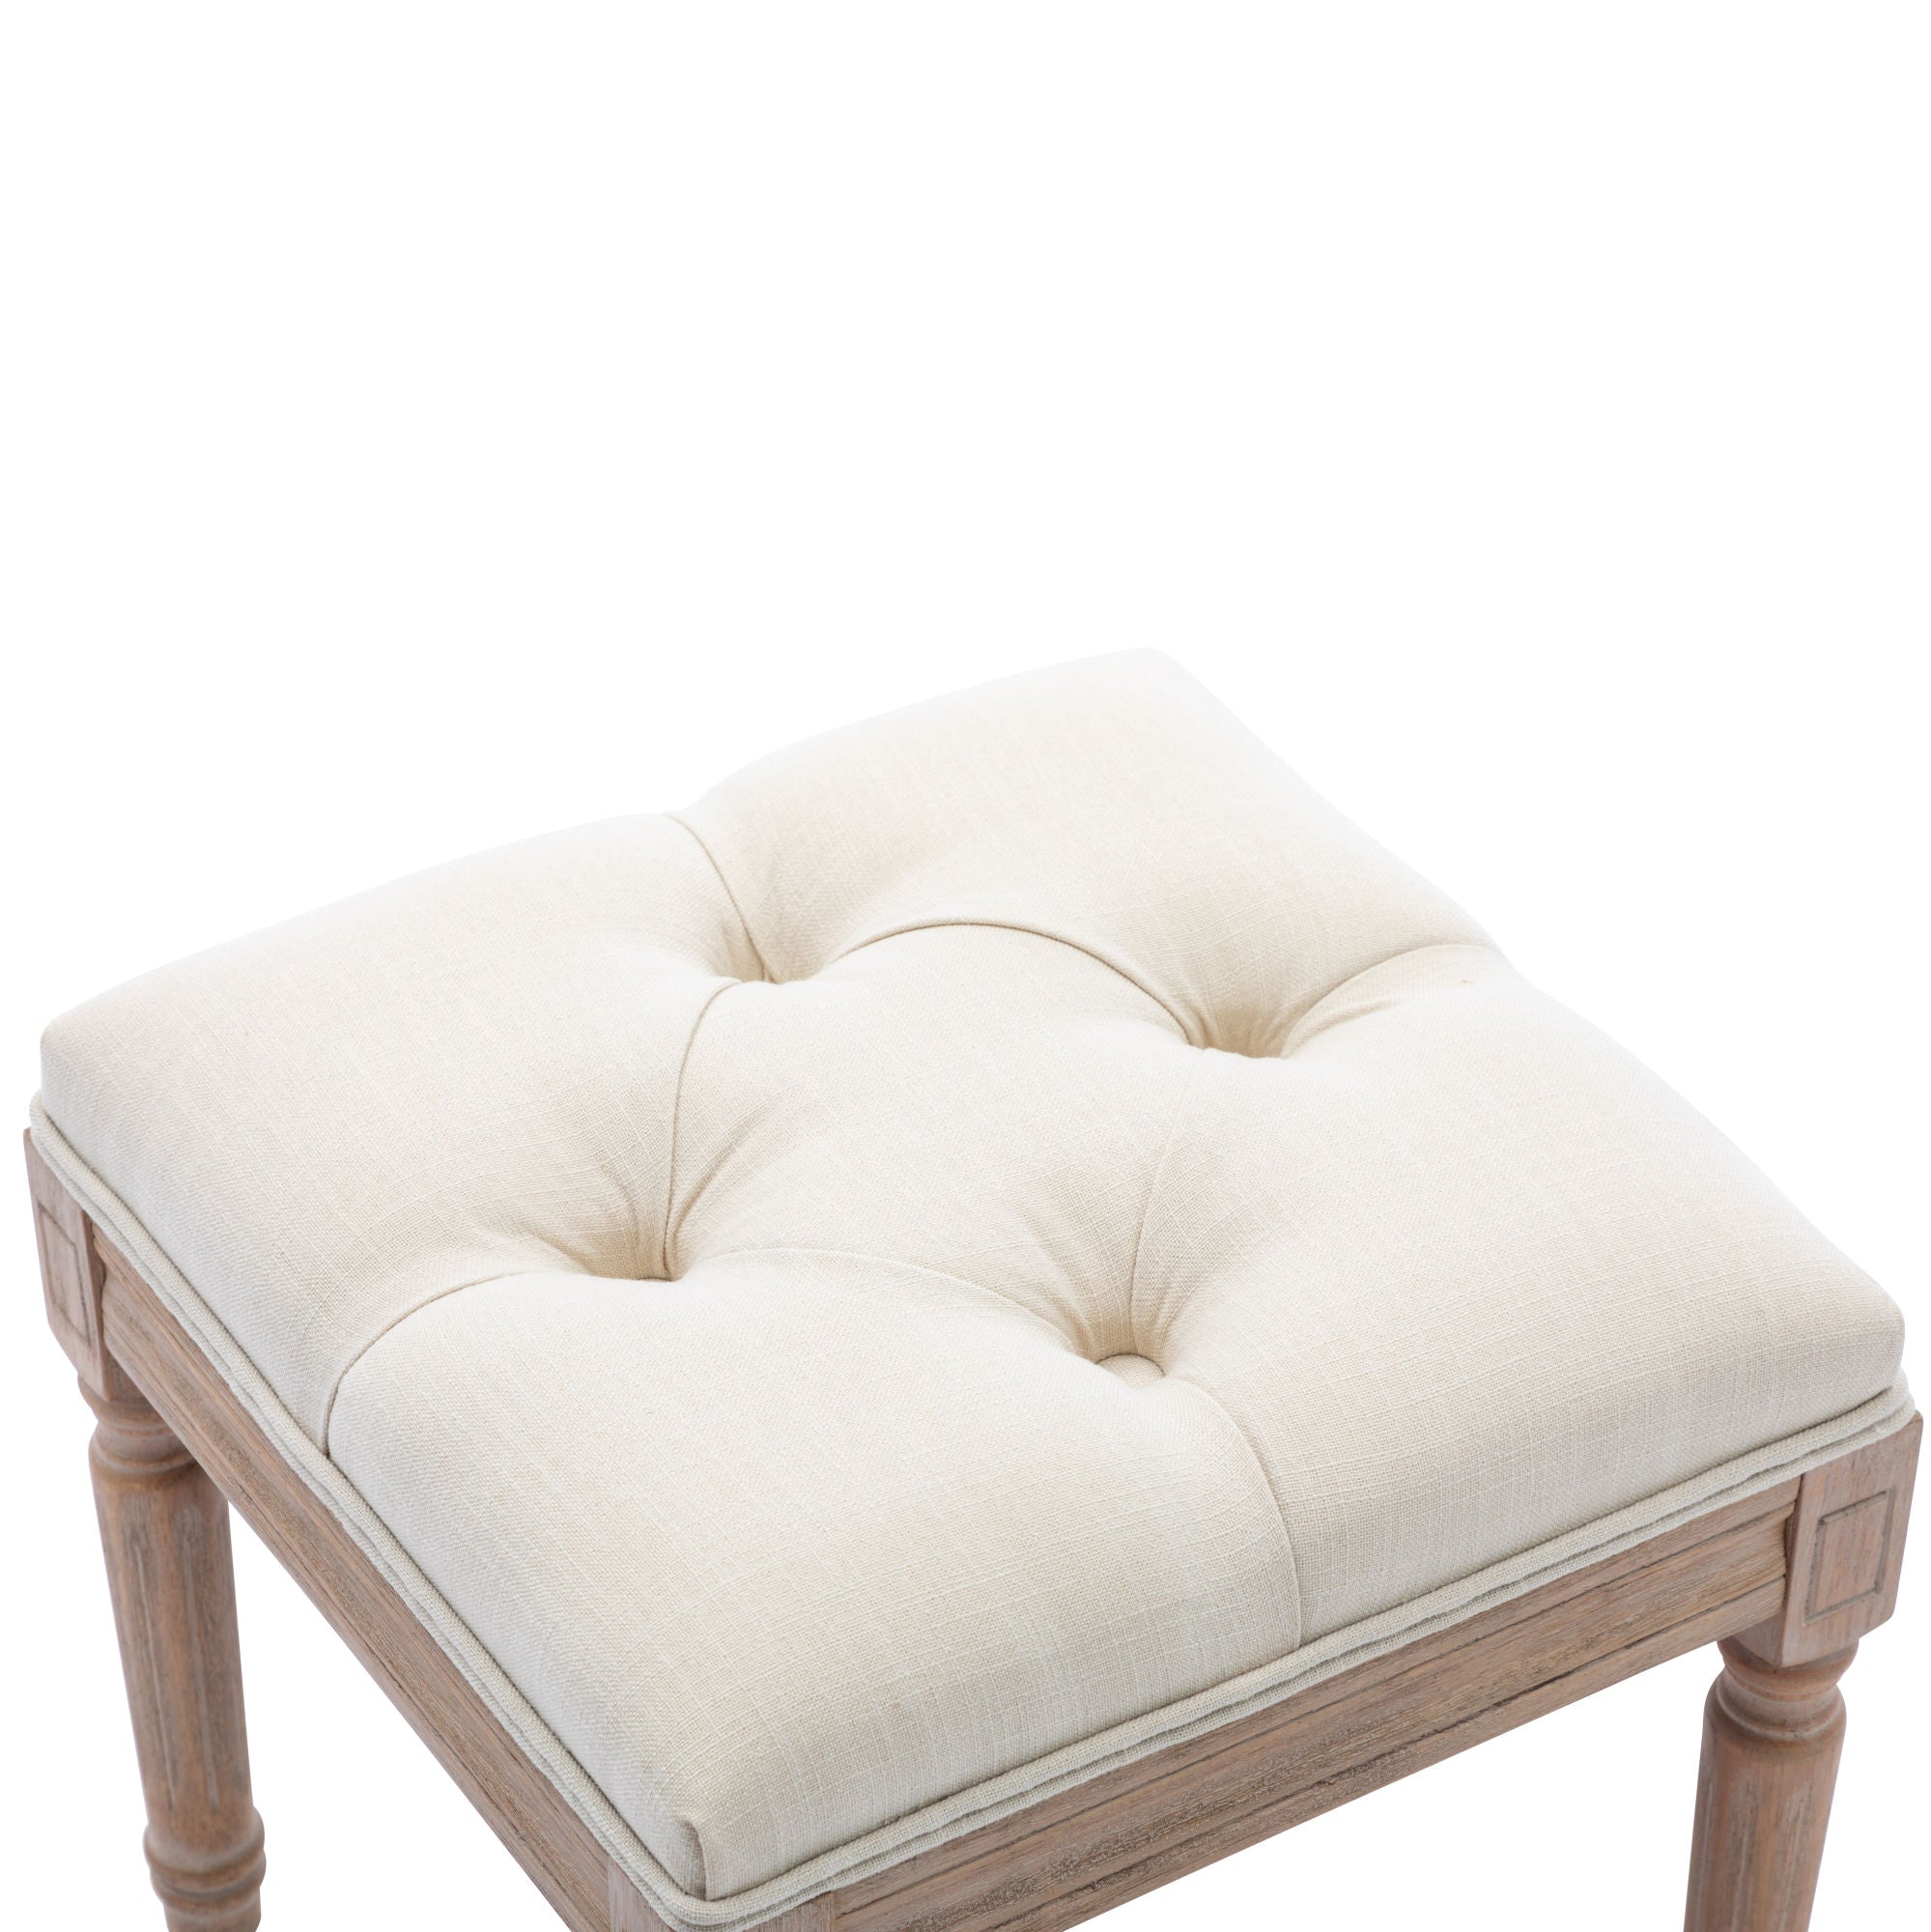 Padded Square Ottoman Bench